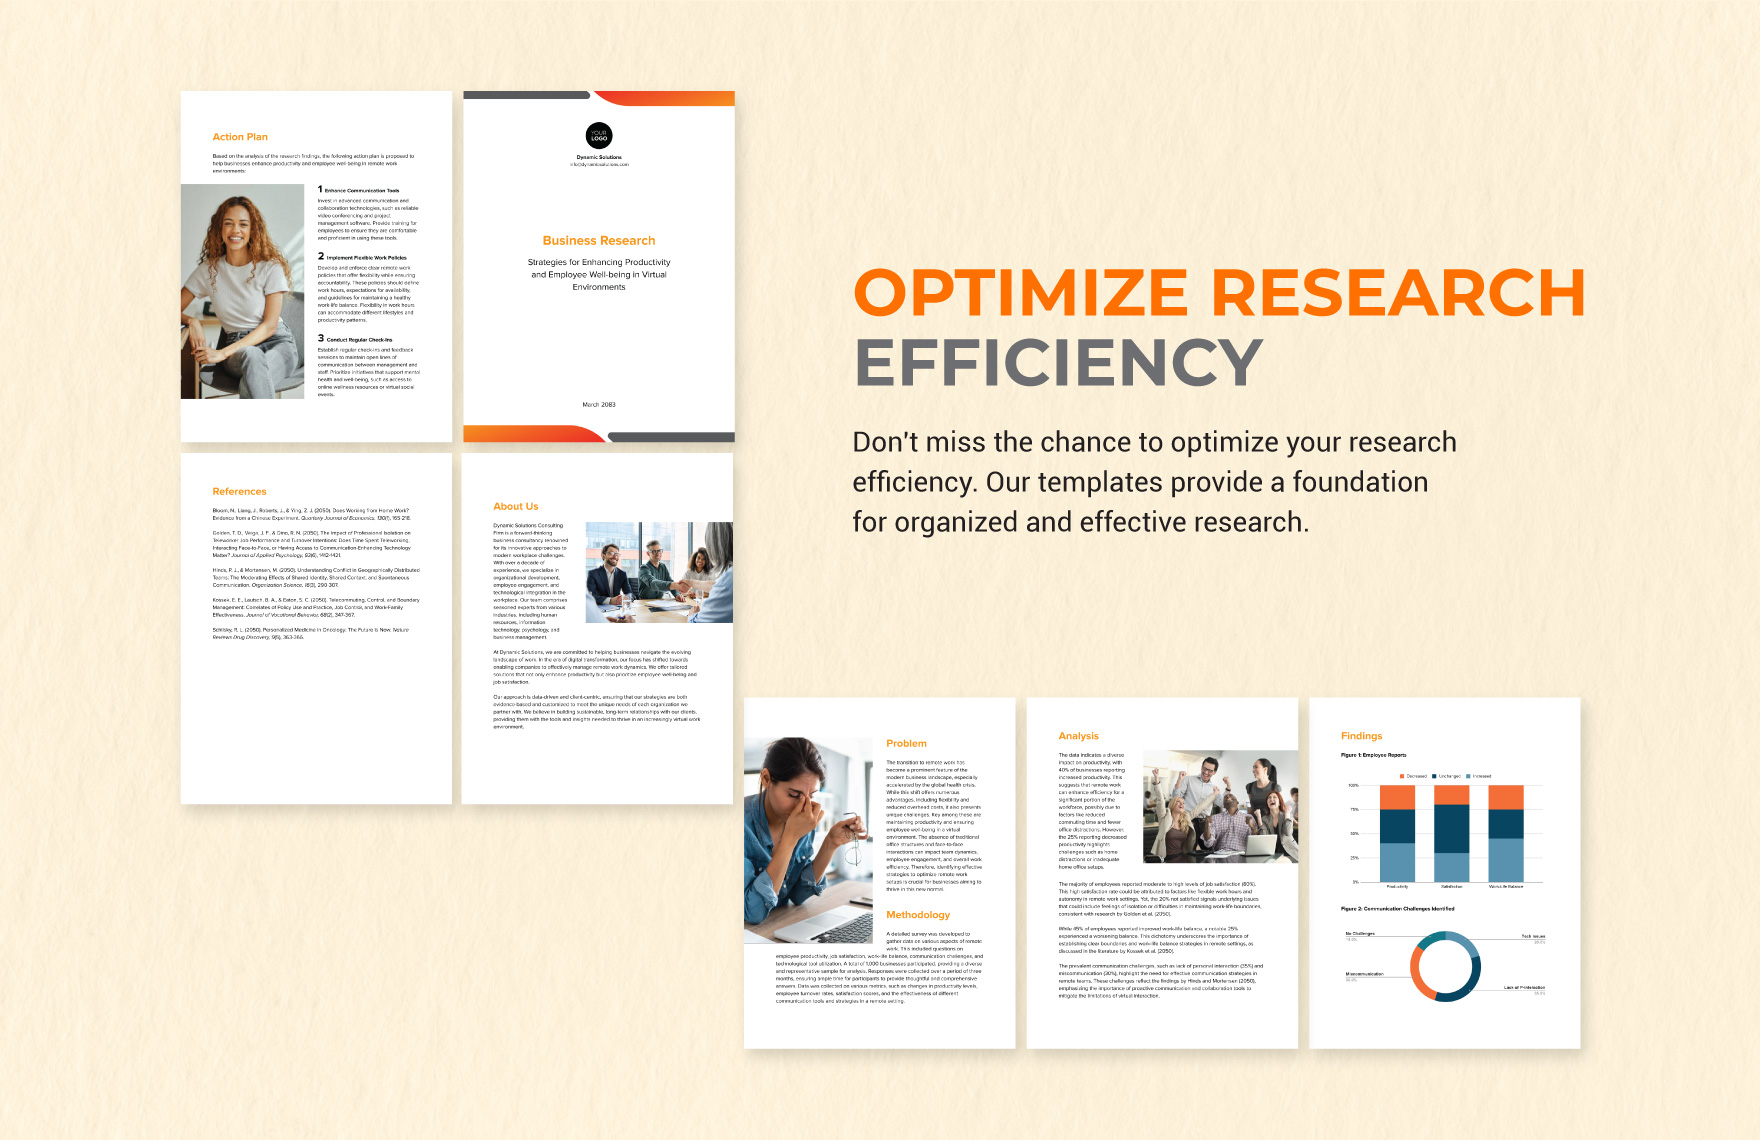 Business Research Template